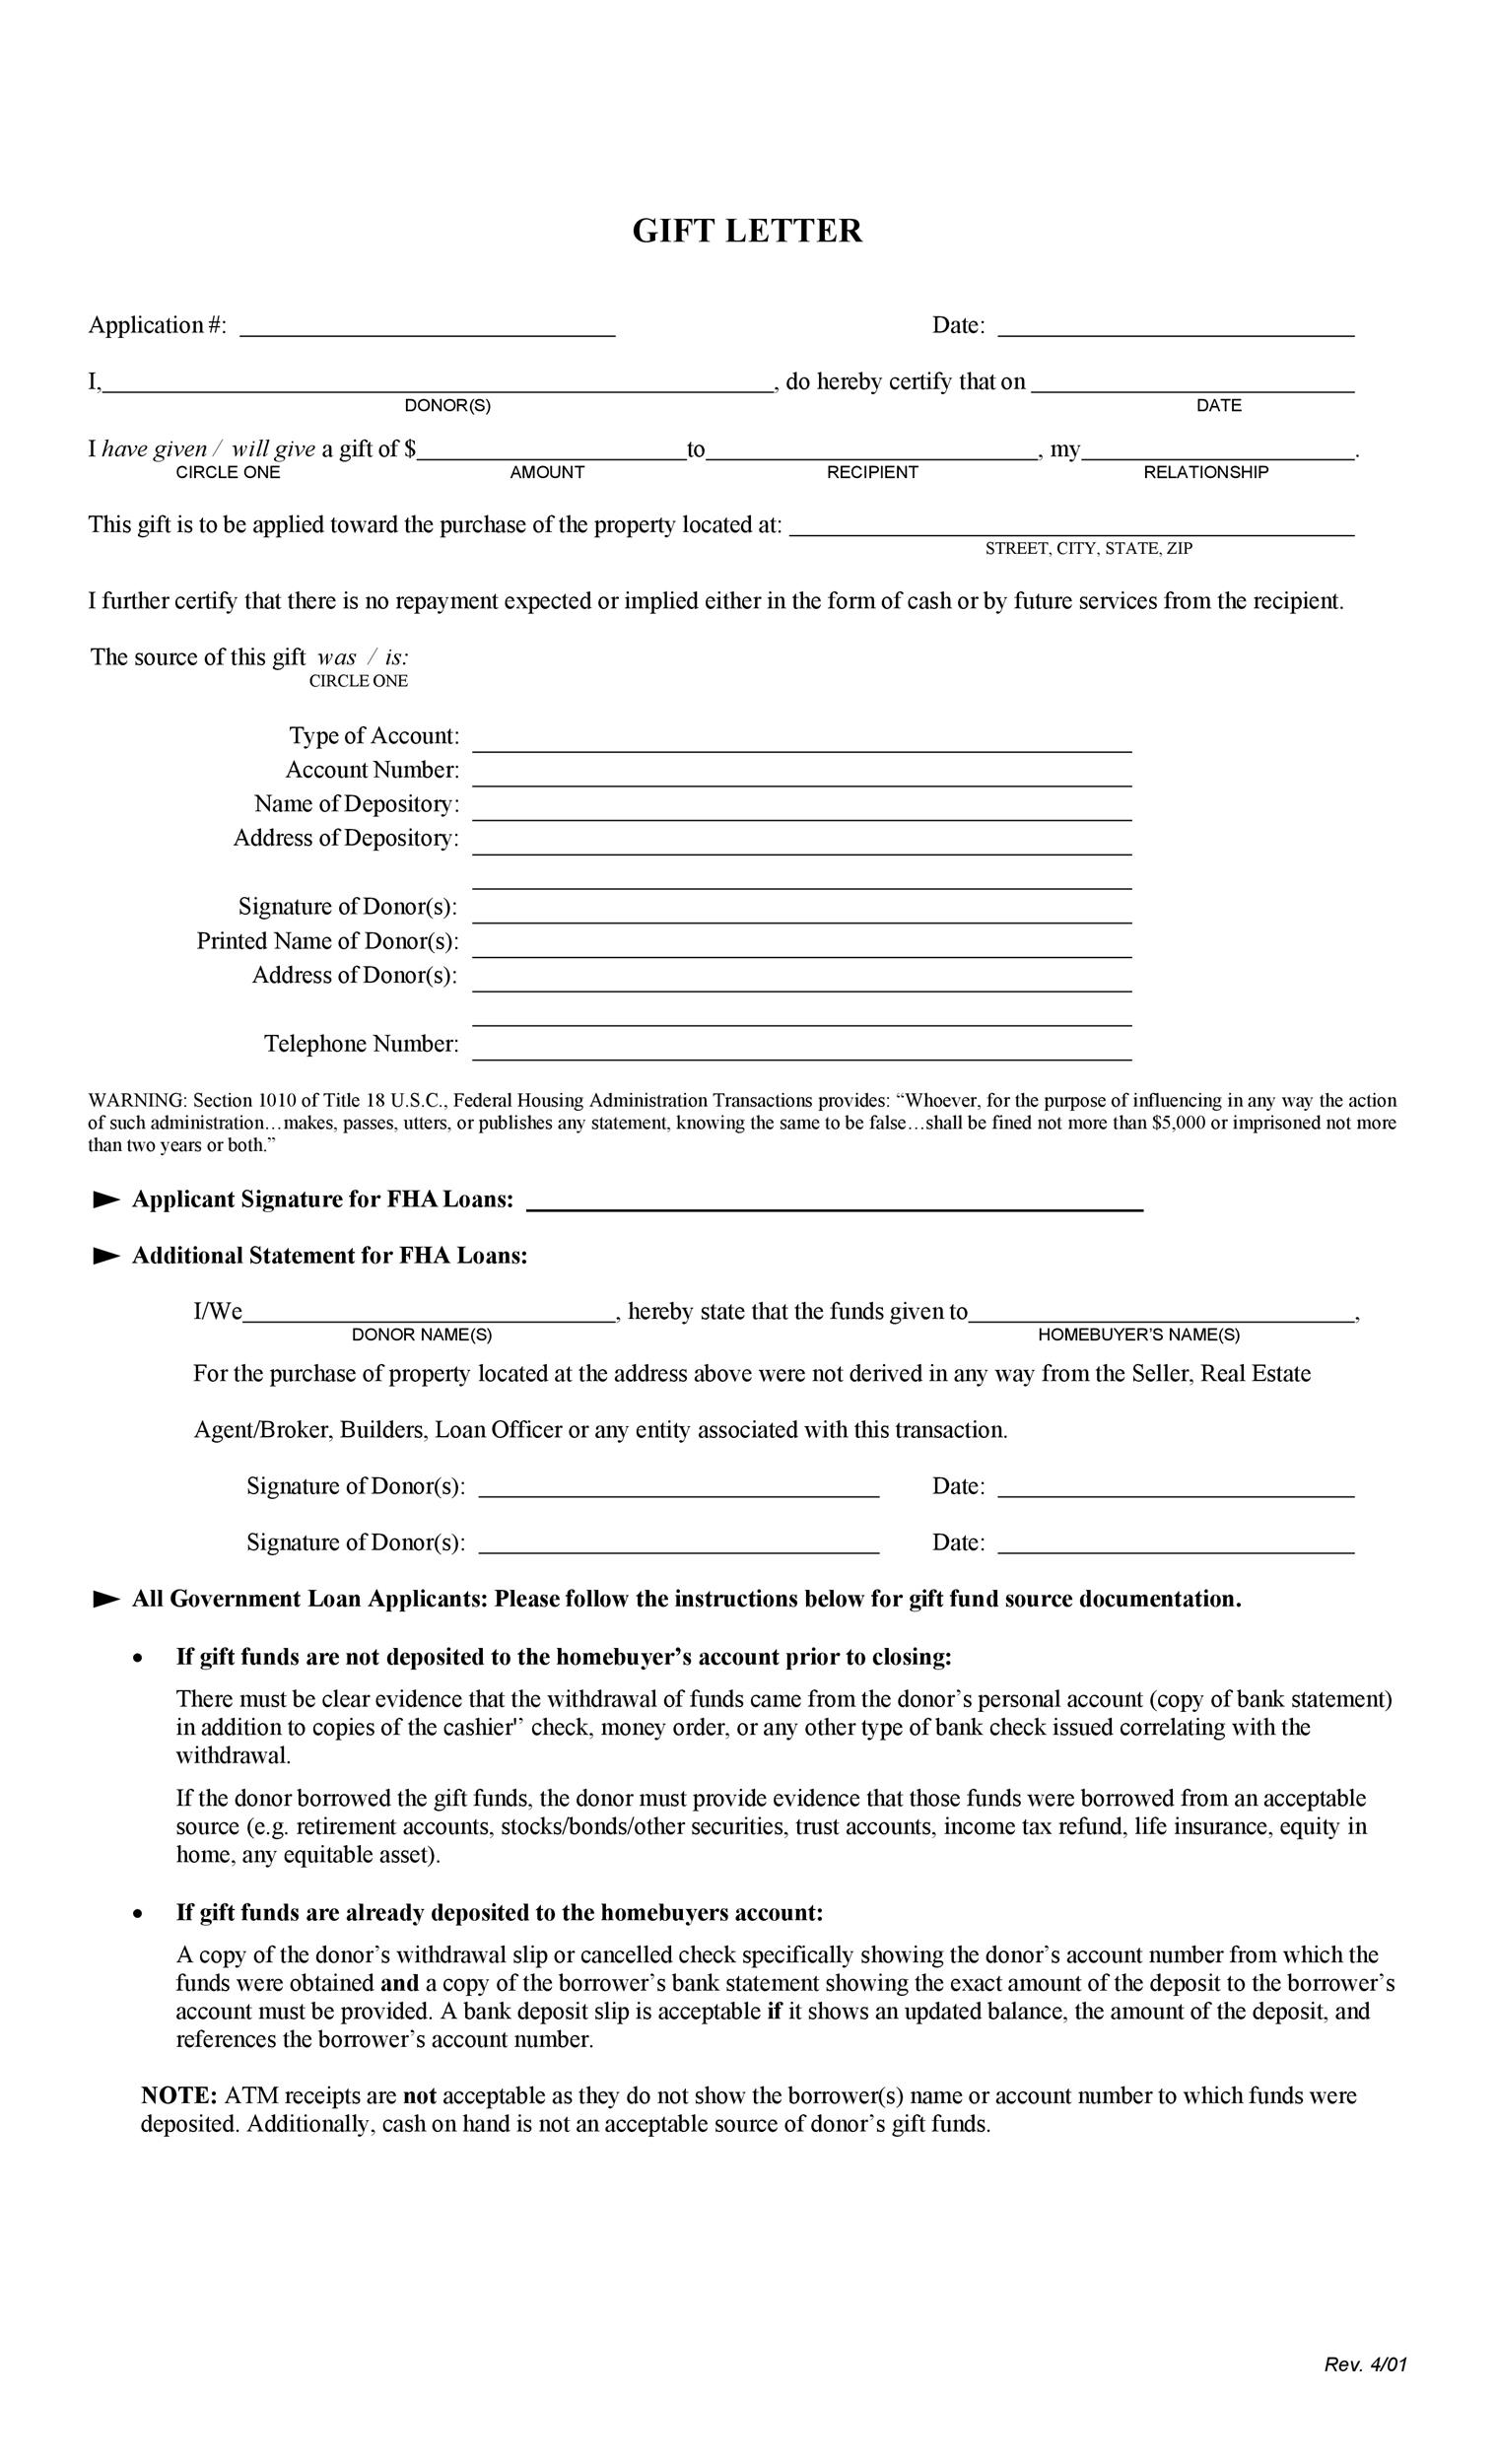 Gift Letter For Mortgage Down Payment Pdf from templatelab.com